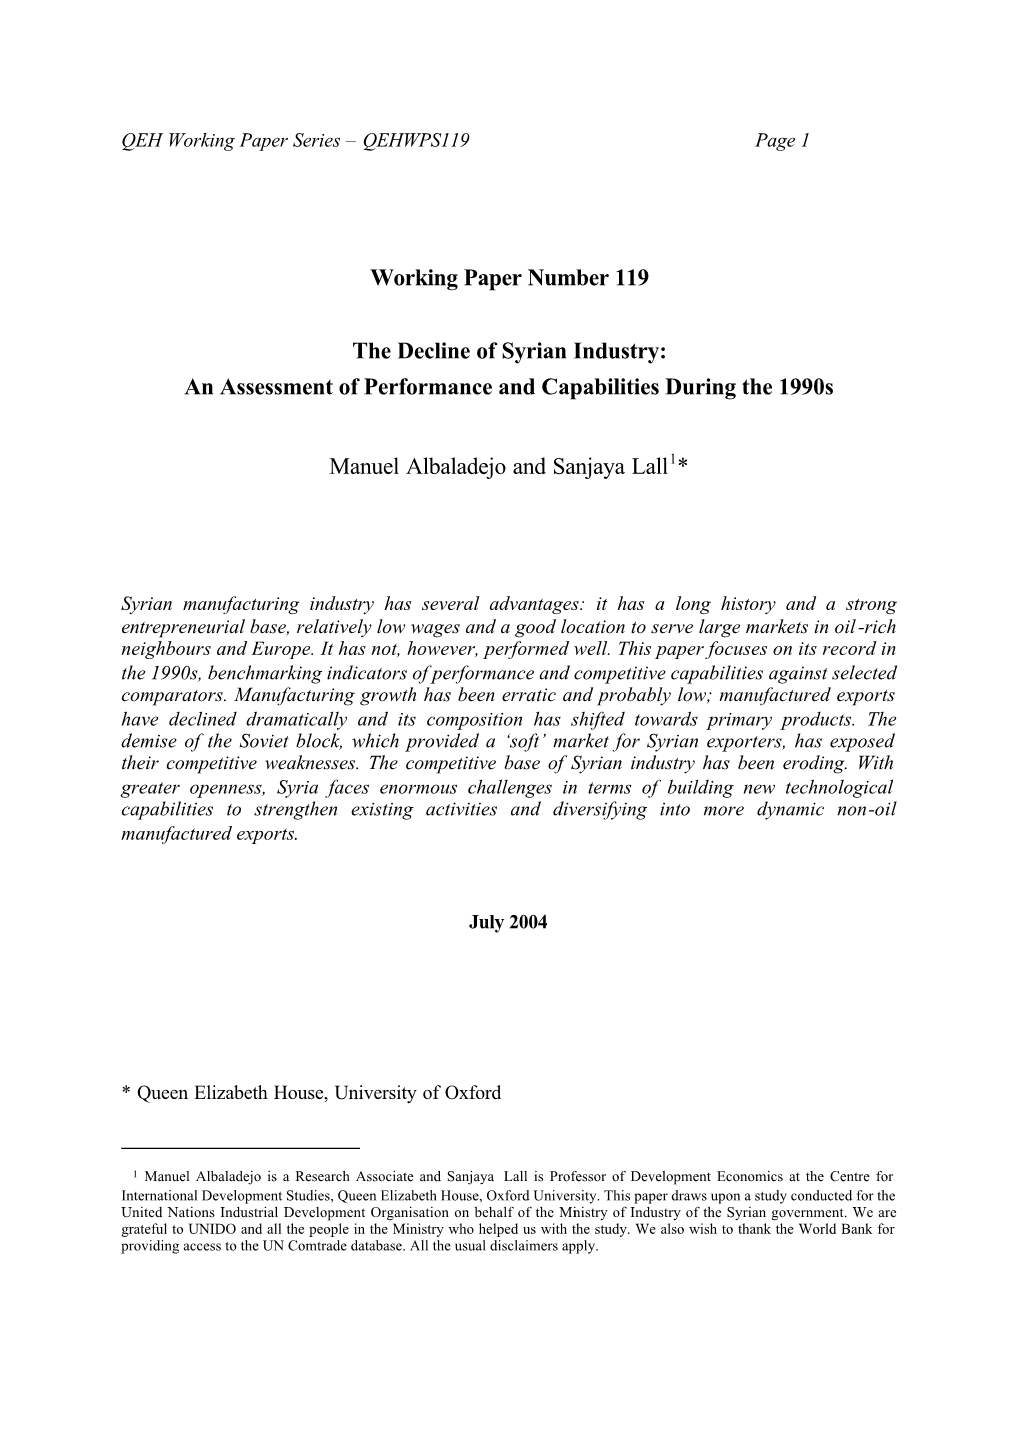 Working Paper Number 119 the Decline Of